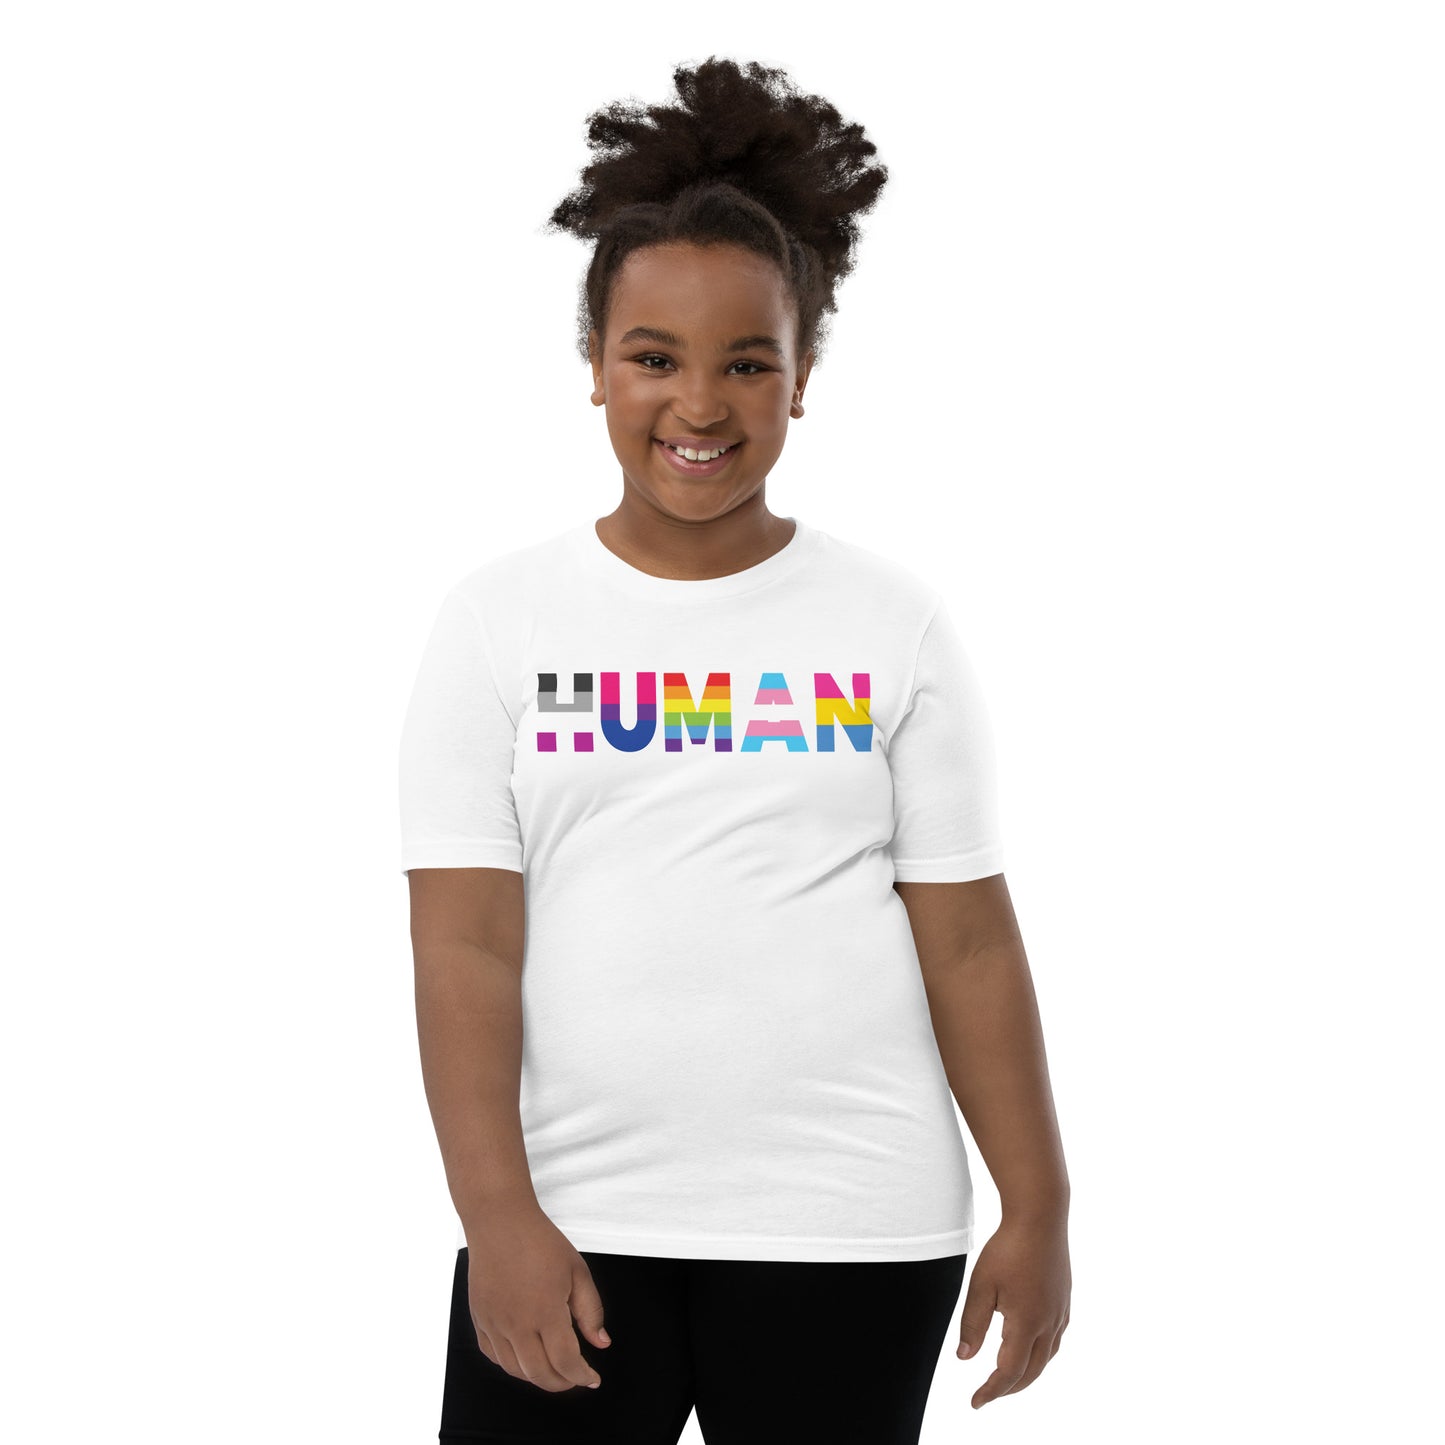 We are ALL Human Tee Youth